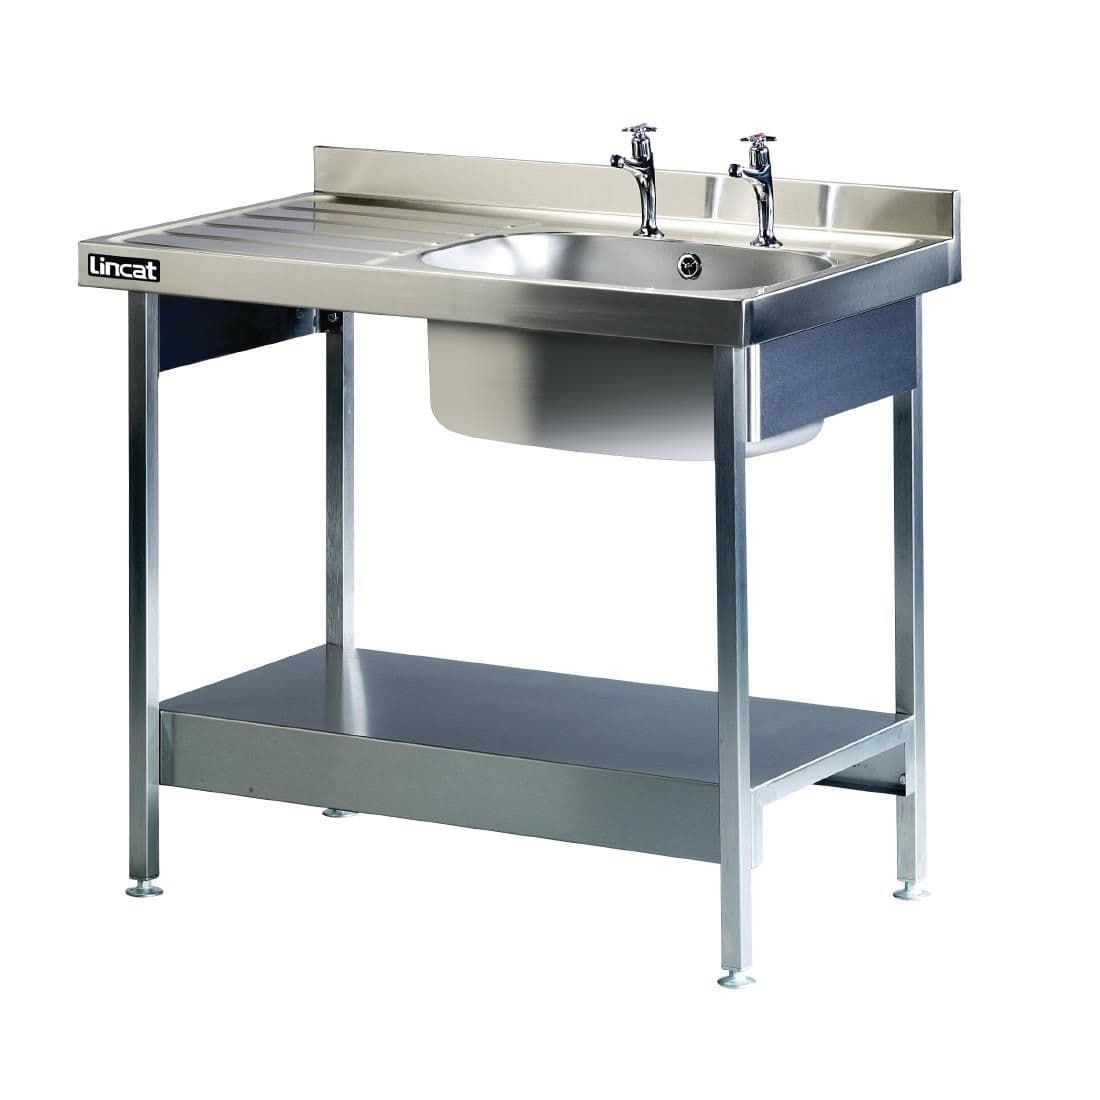 GJ705 Lincat Stainless Steel Single Sink Unit with Left Hand Drainer L881LH JD Catering Equipment Solutions Ltd